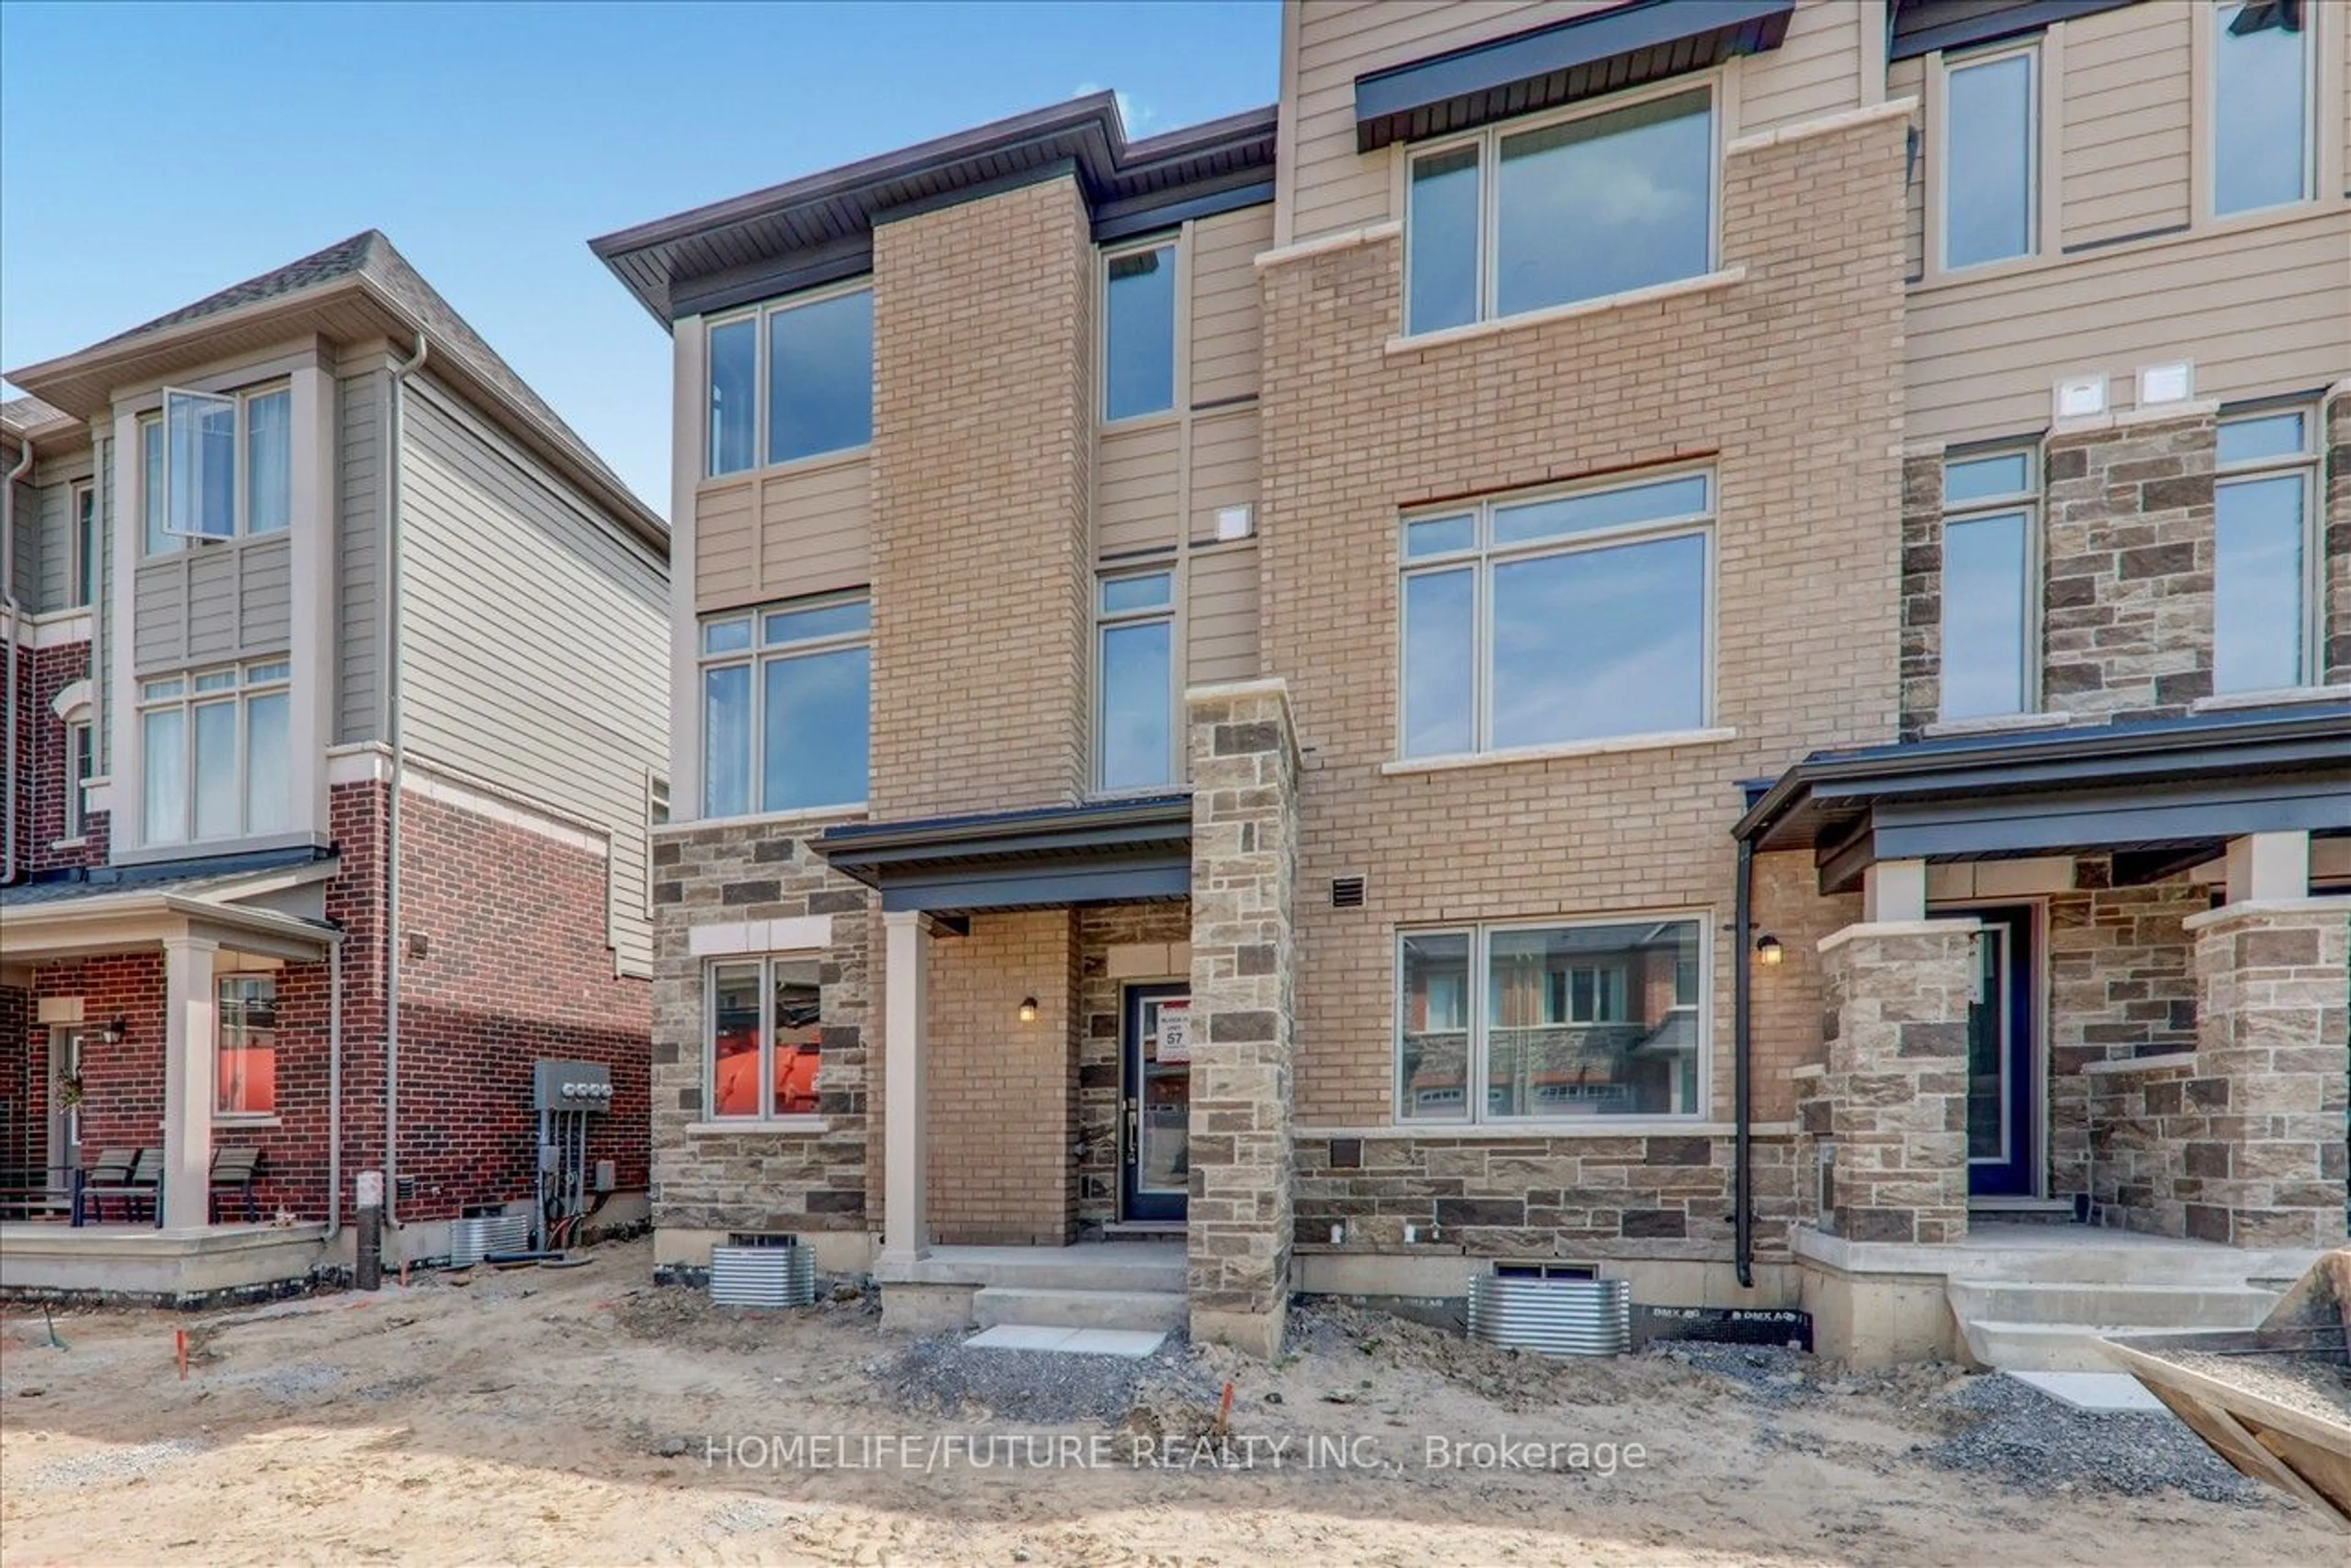 Home with brick exterior material for 154 Lageer Dr, Whitchurch-Stouffville Ontario L4A 5G2